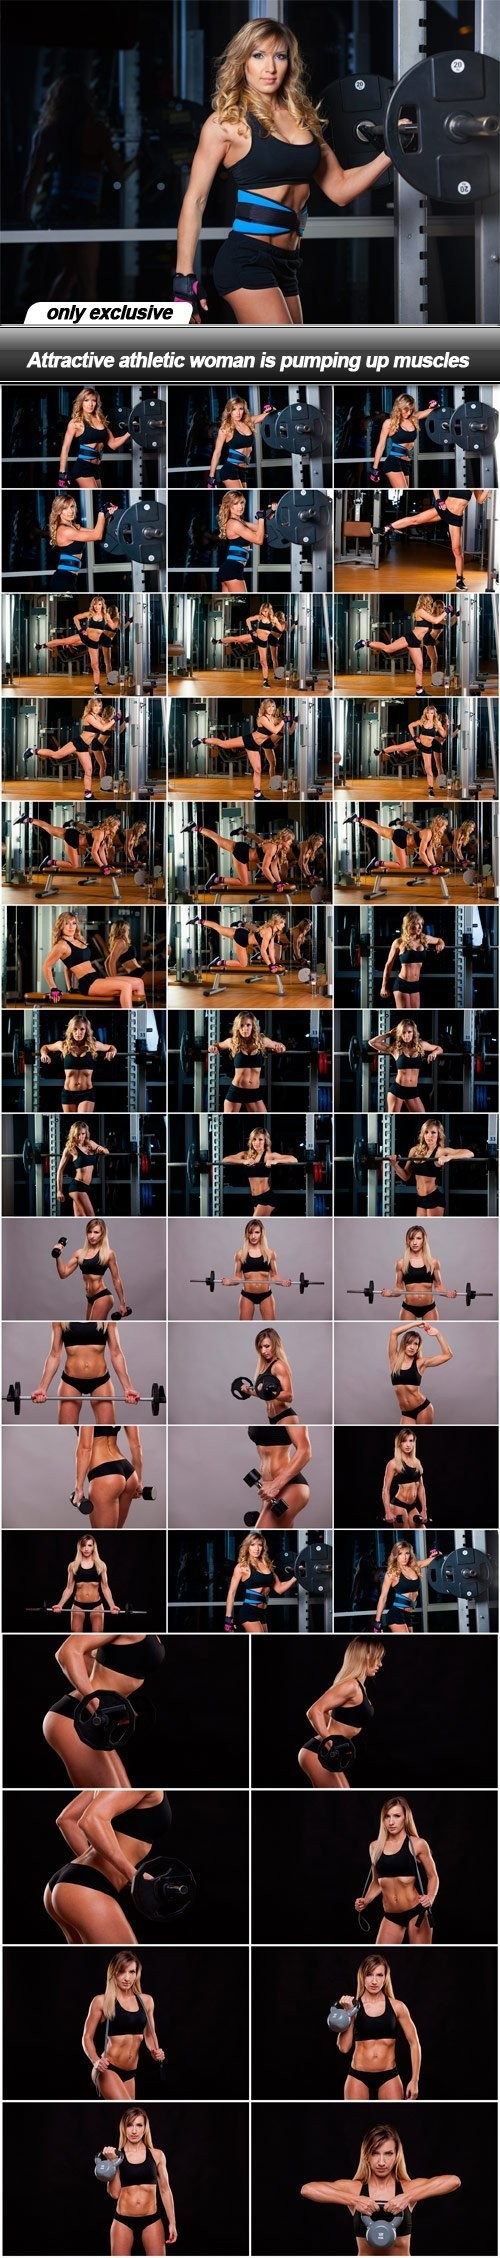 Attractive athletic woman is pumping up muscles - 50 UHQ JPEG